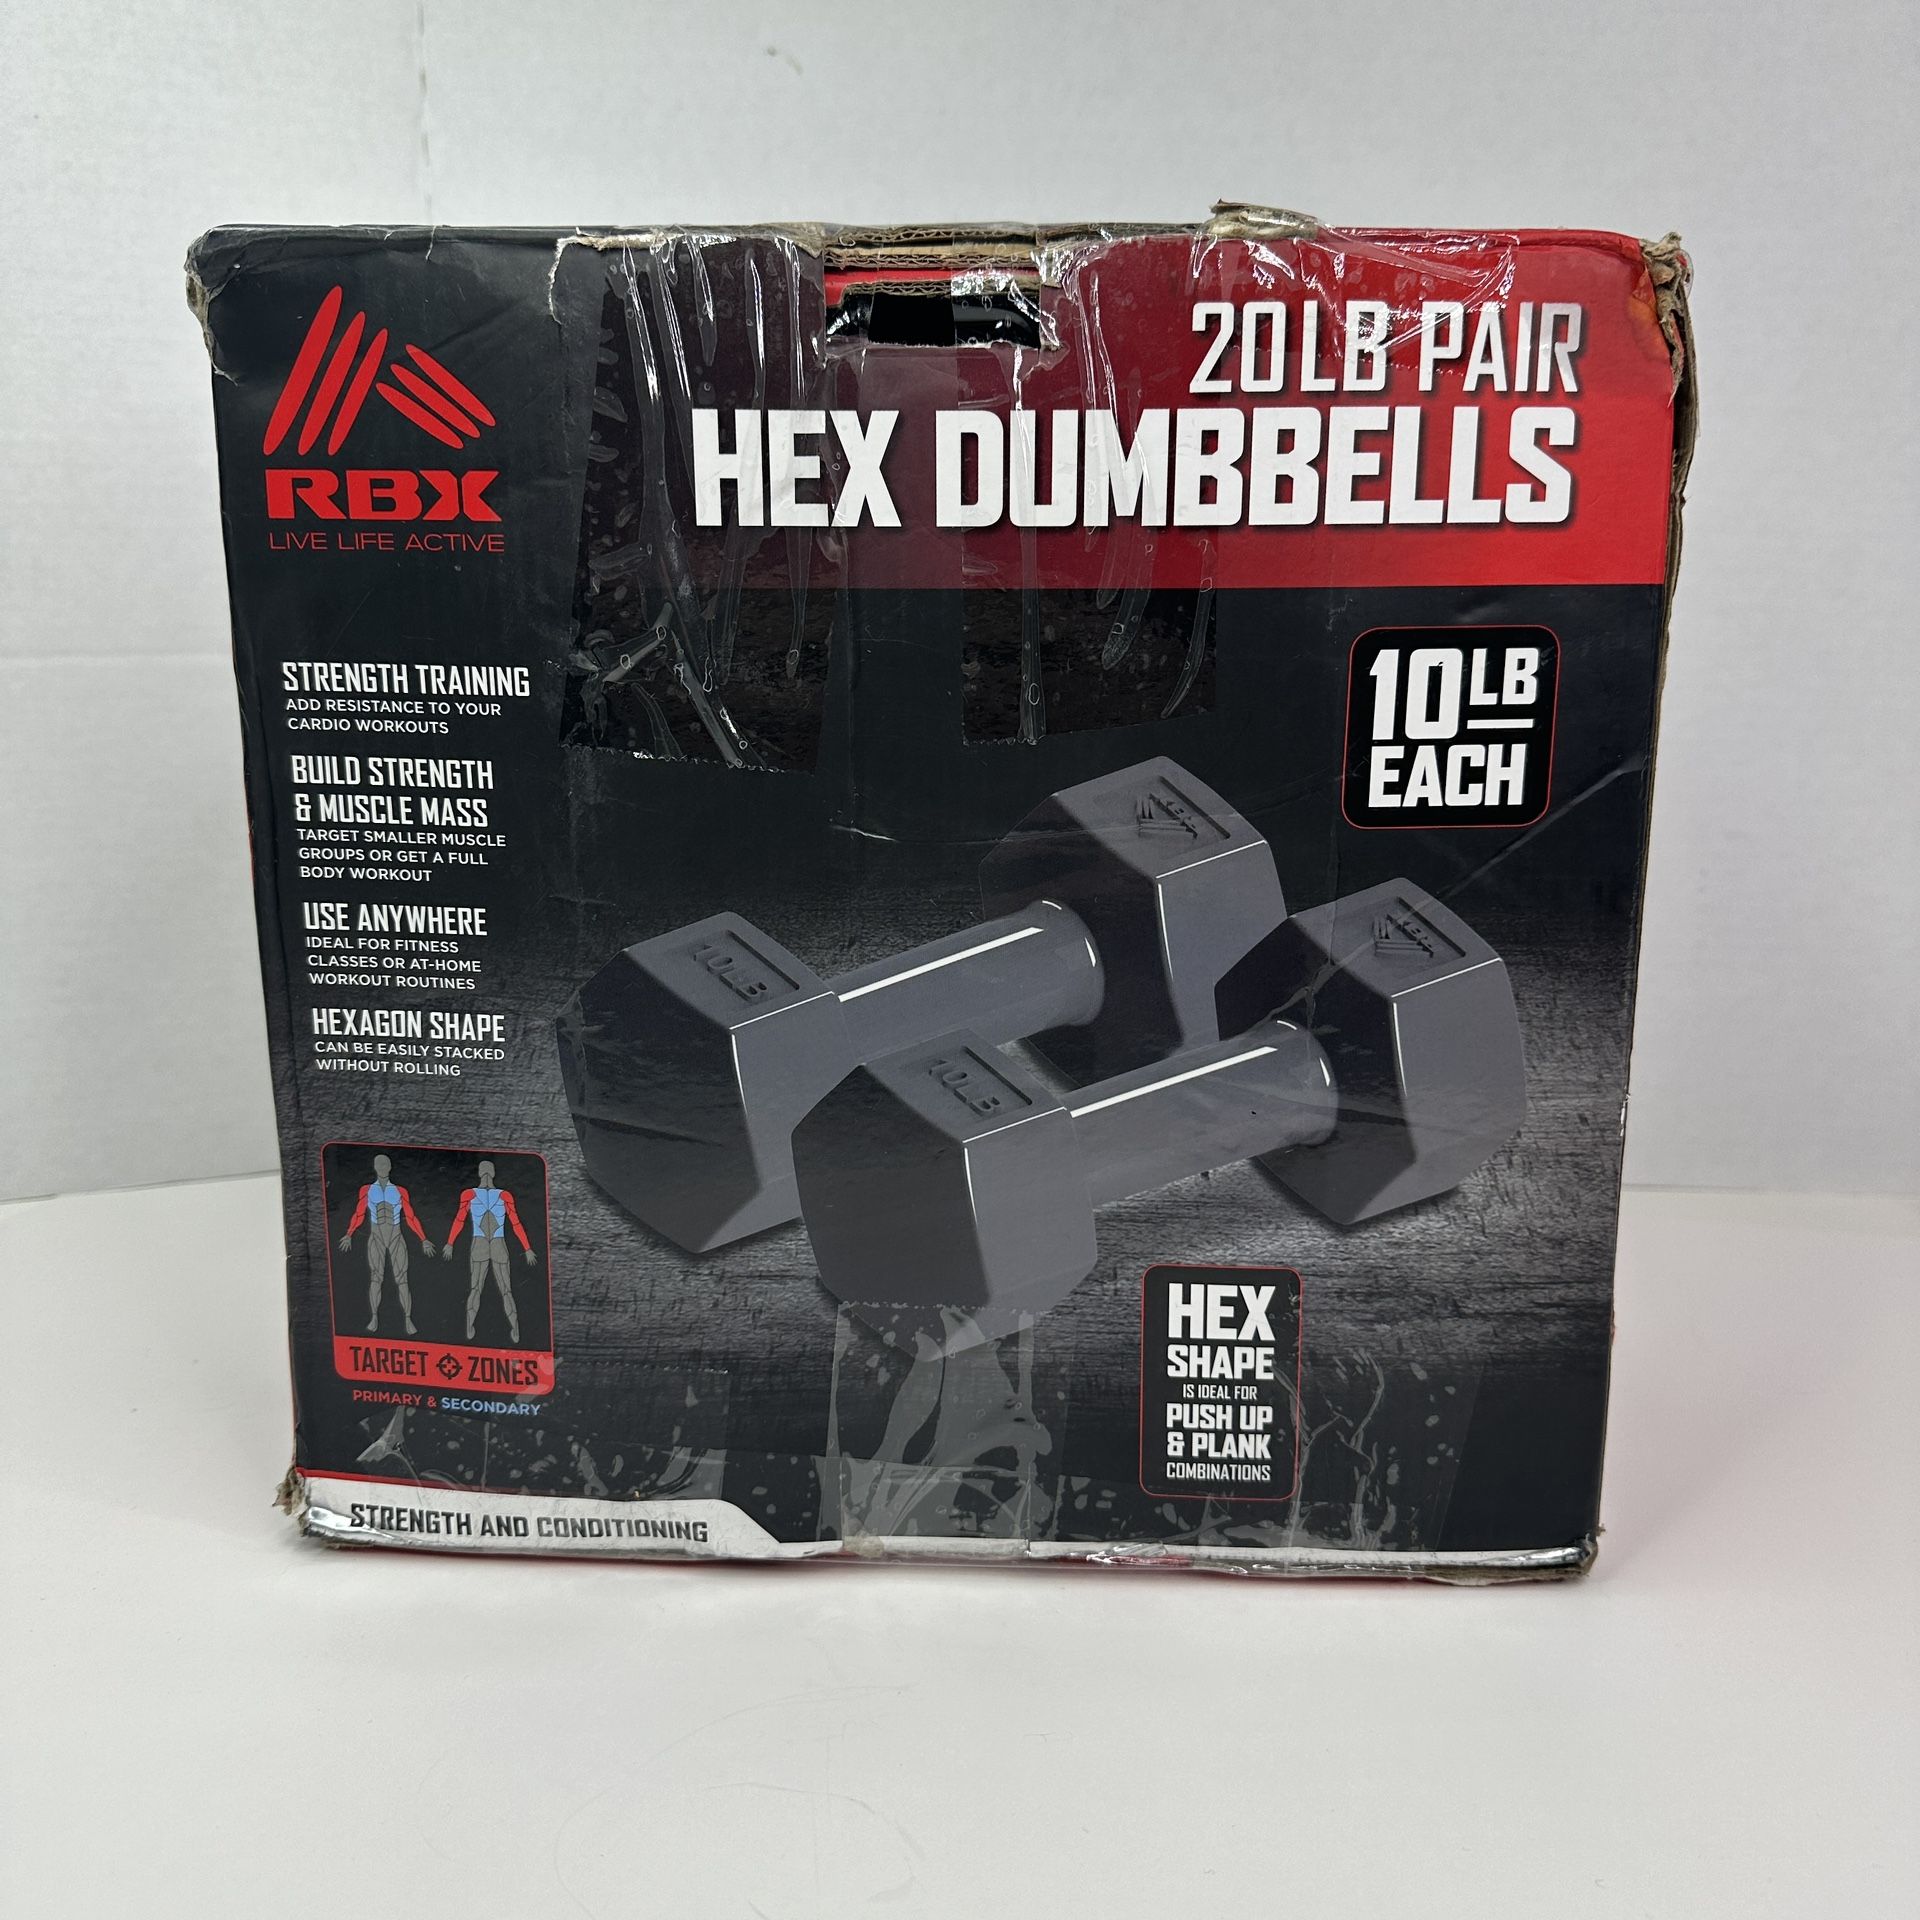 RBX Vinyl Coated Hand Weight Dumbbell Set - Set Of 2 (10lbs Each)